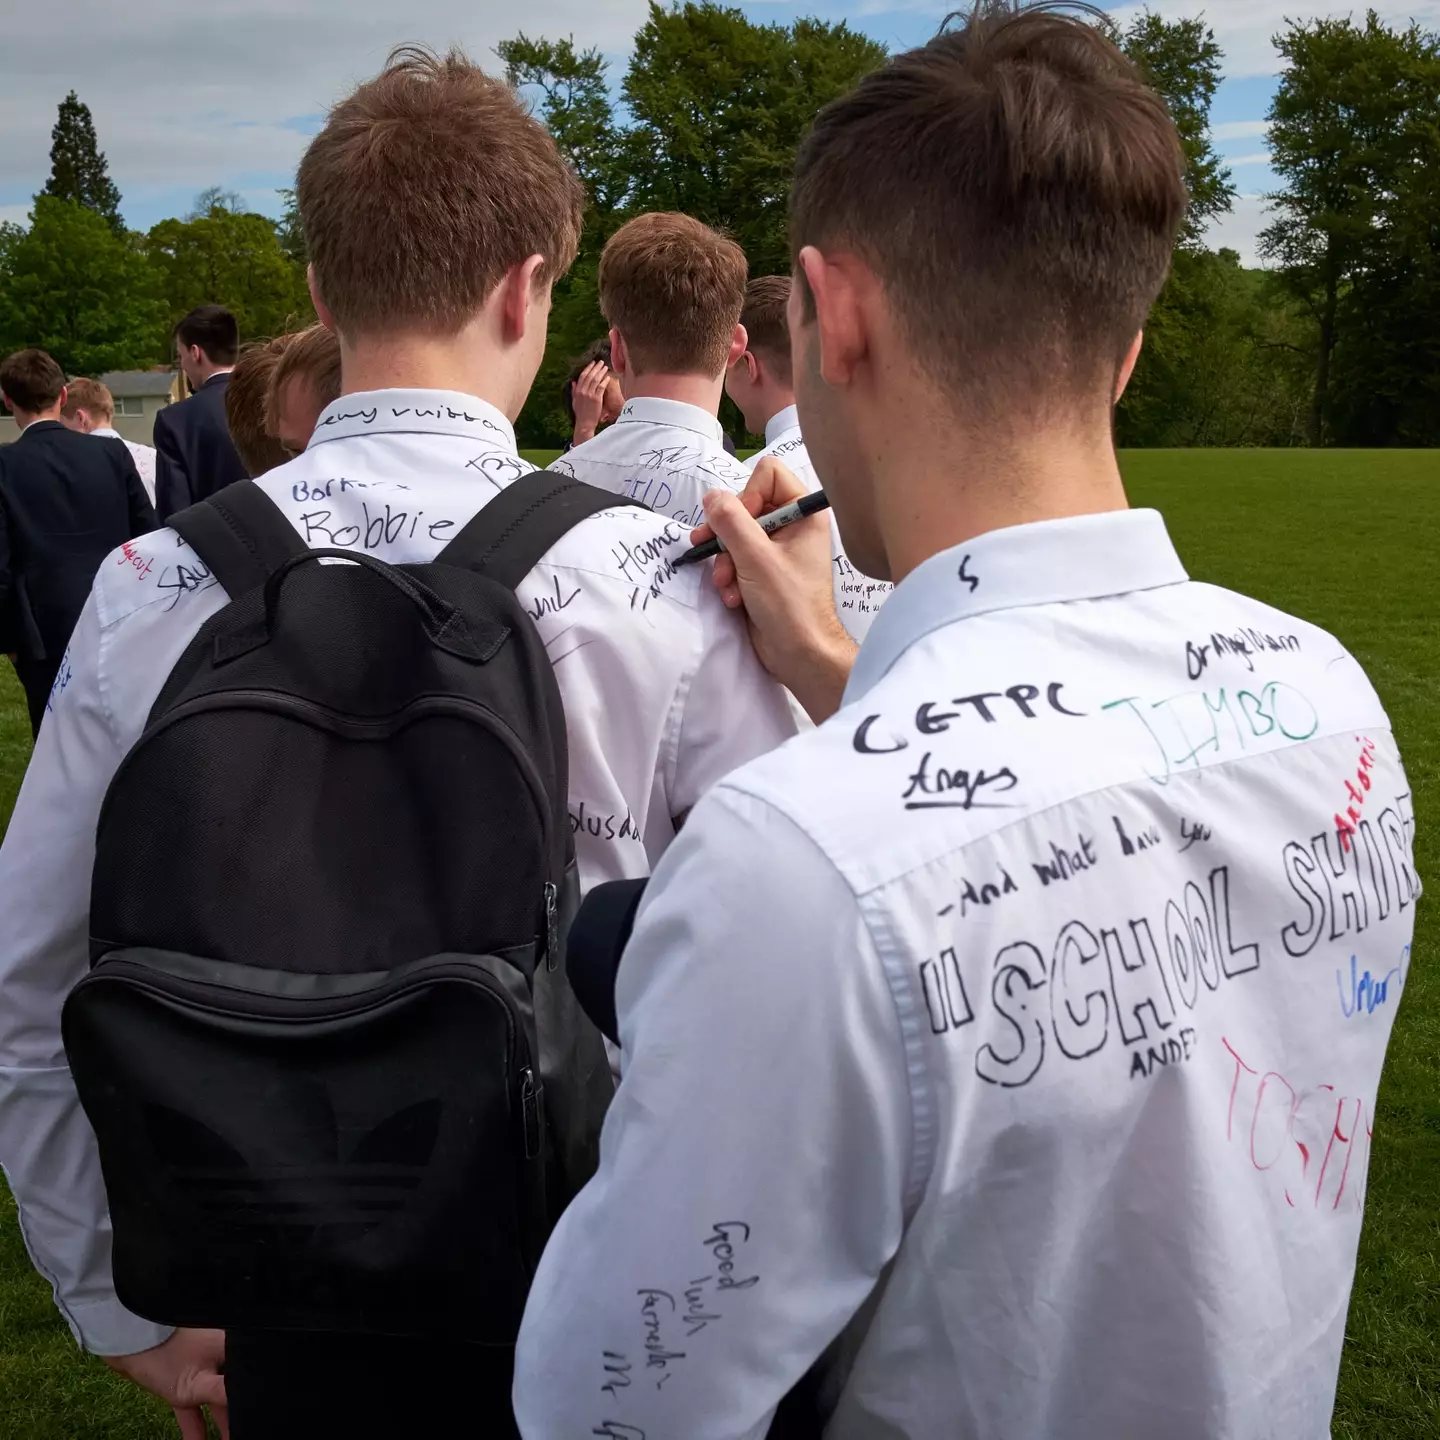 Signing shirts on the last day of school is a fine old tradition in the UK.